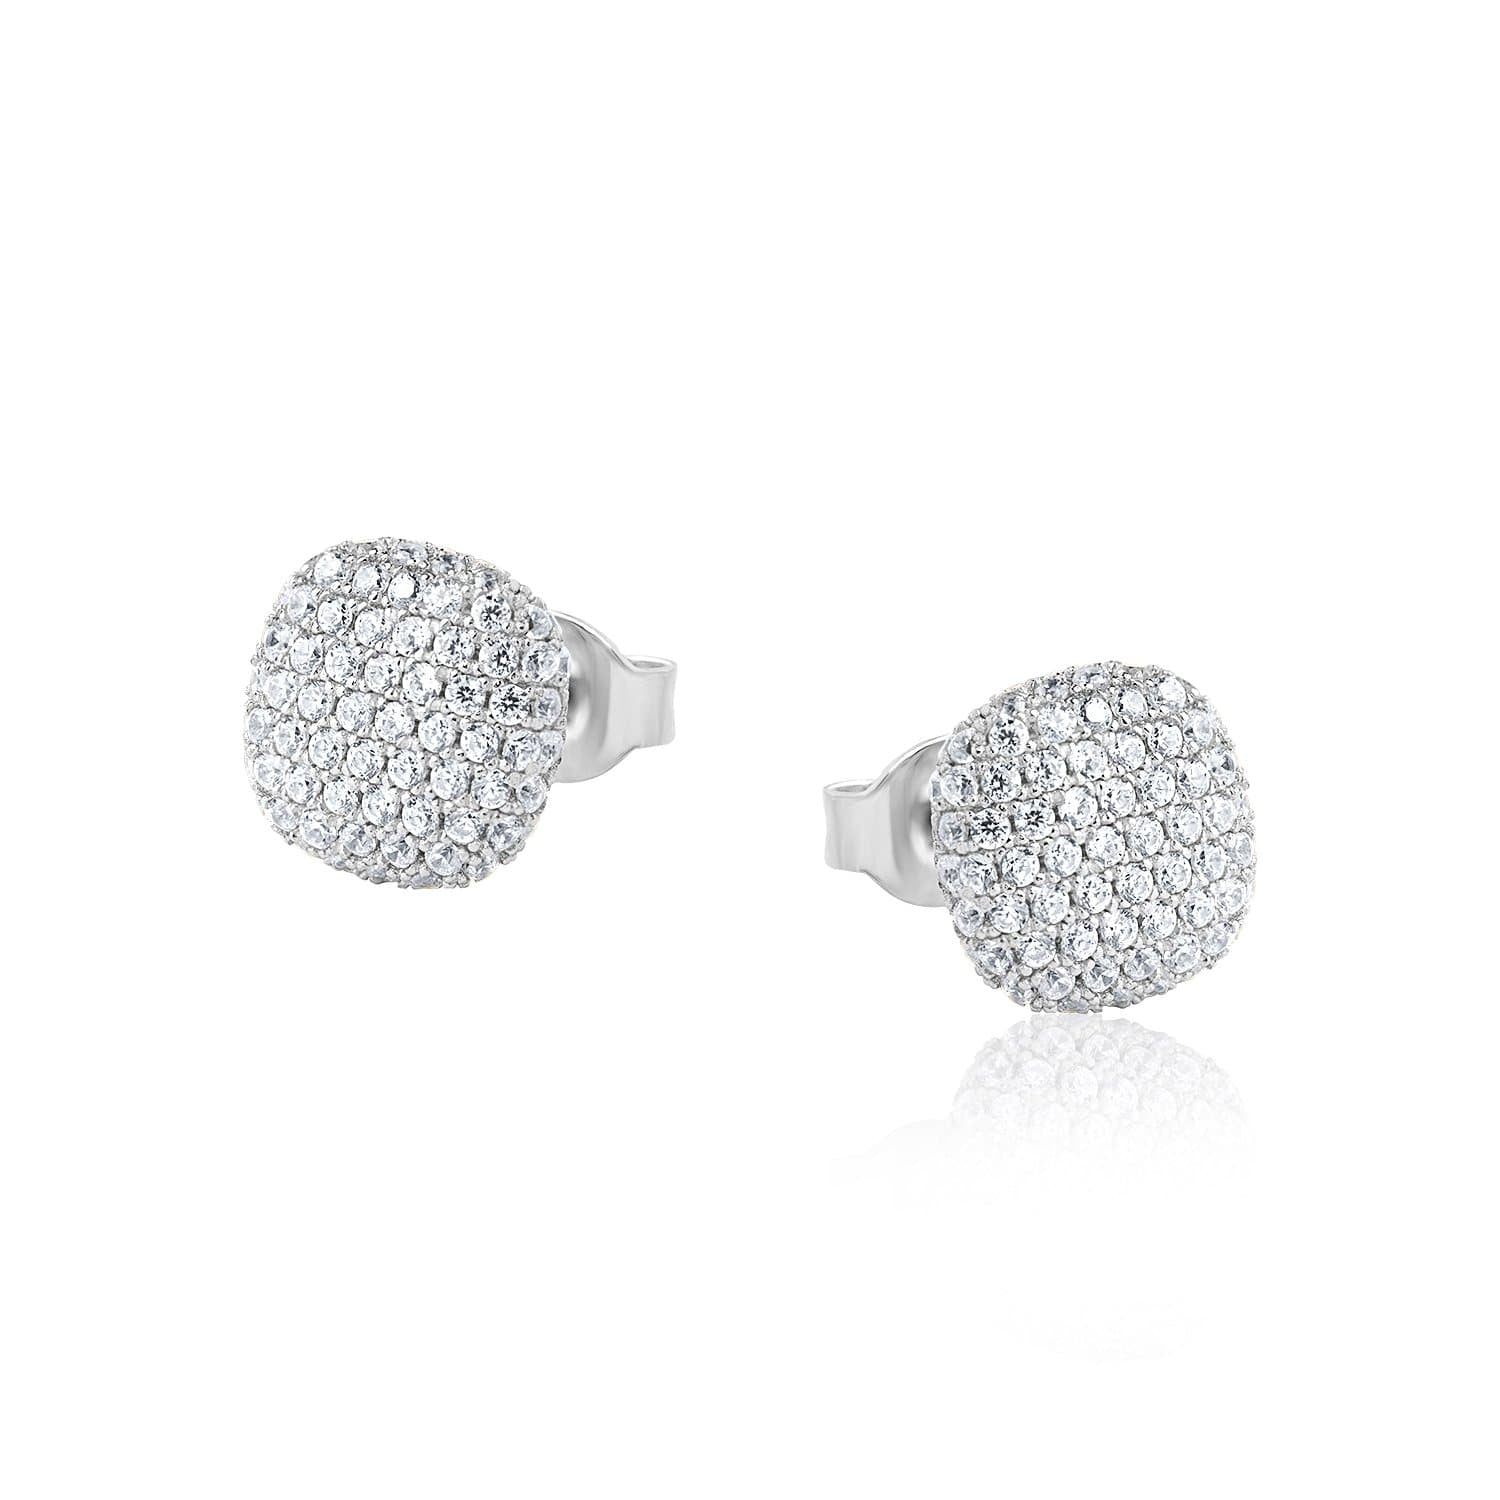 Lynora Jewellery Earring Sterling Silver Micro Pave Cushion Earrings Sterling Silver